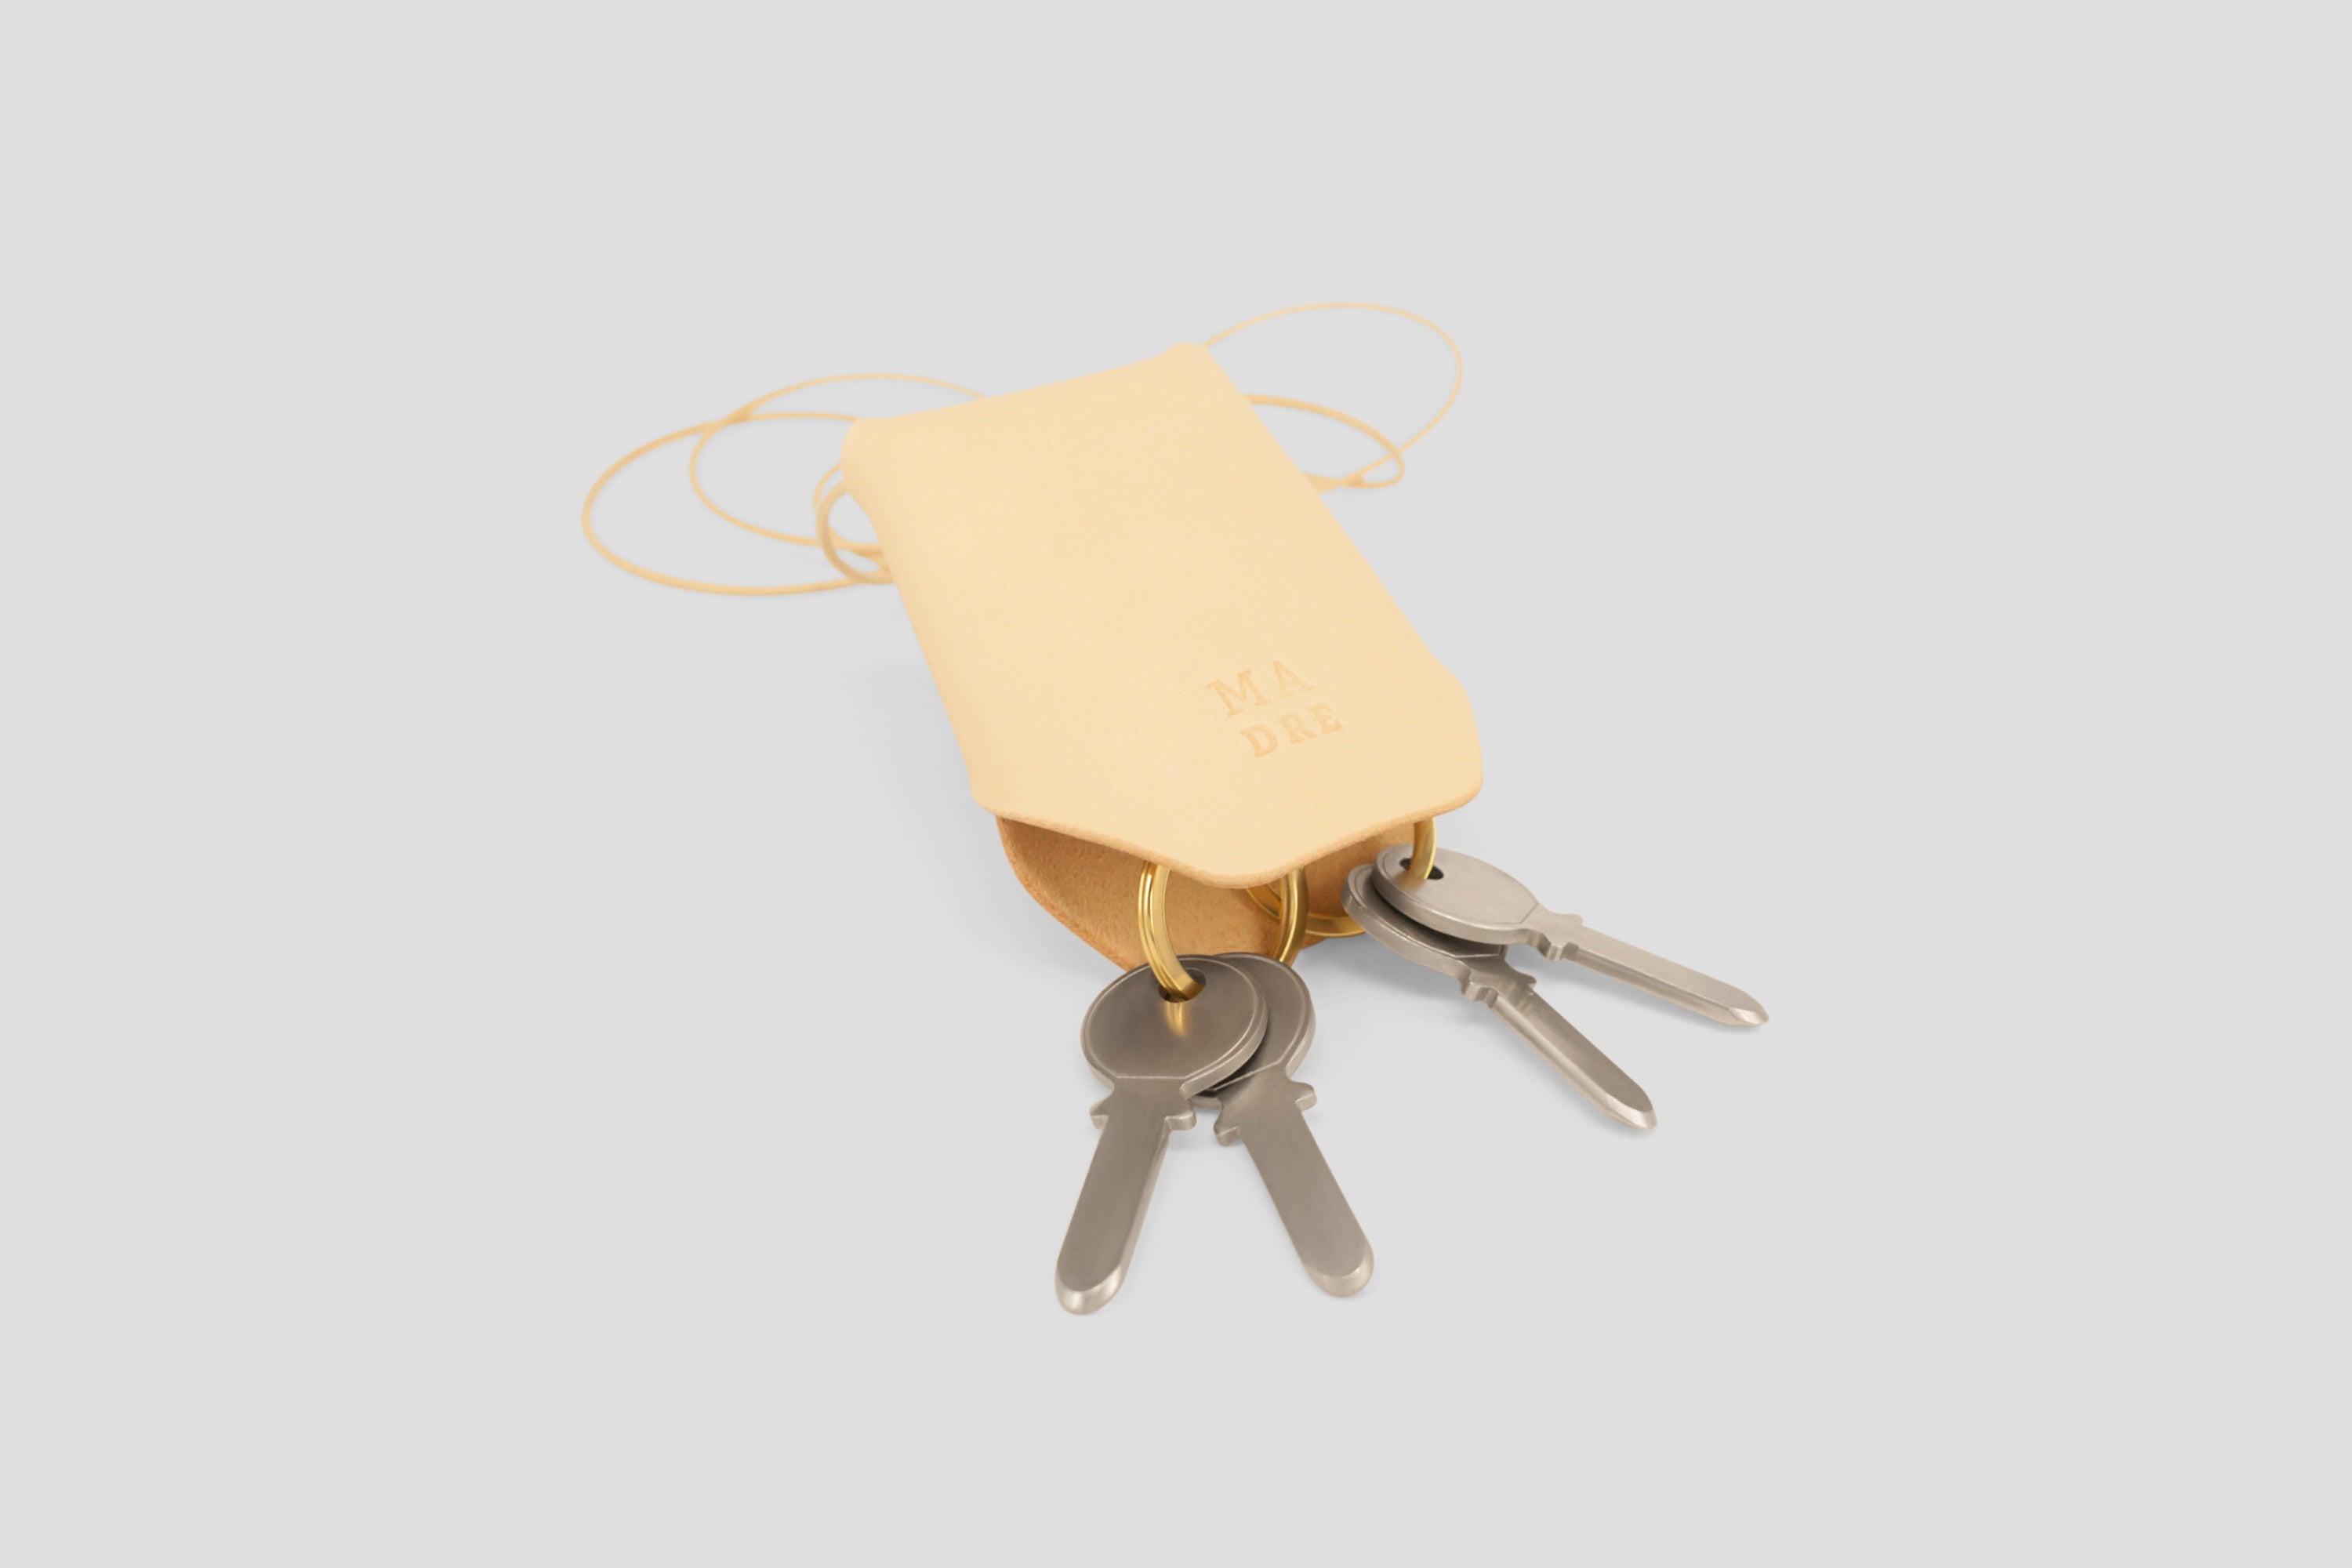 Keyhanger natural color pouch leather clochette made out of vegetable tanned leather designed by atelier madre manuel dreesmann barcelona